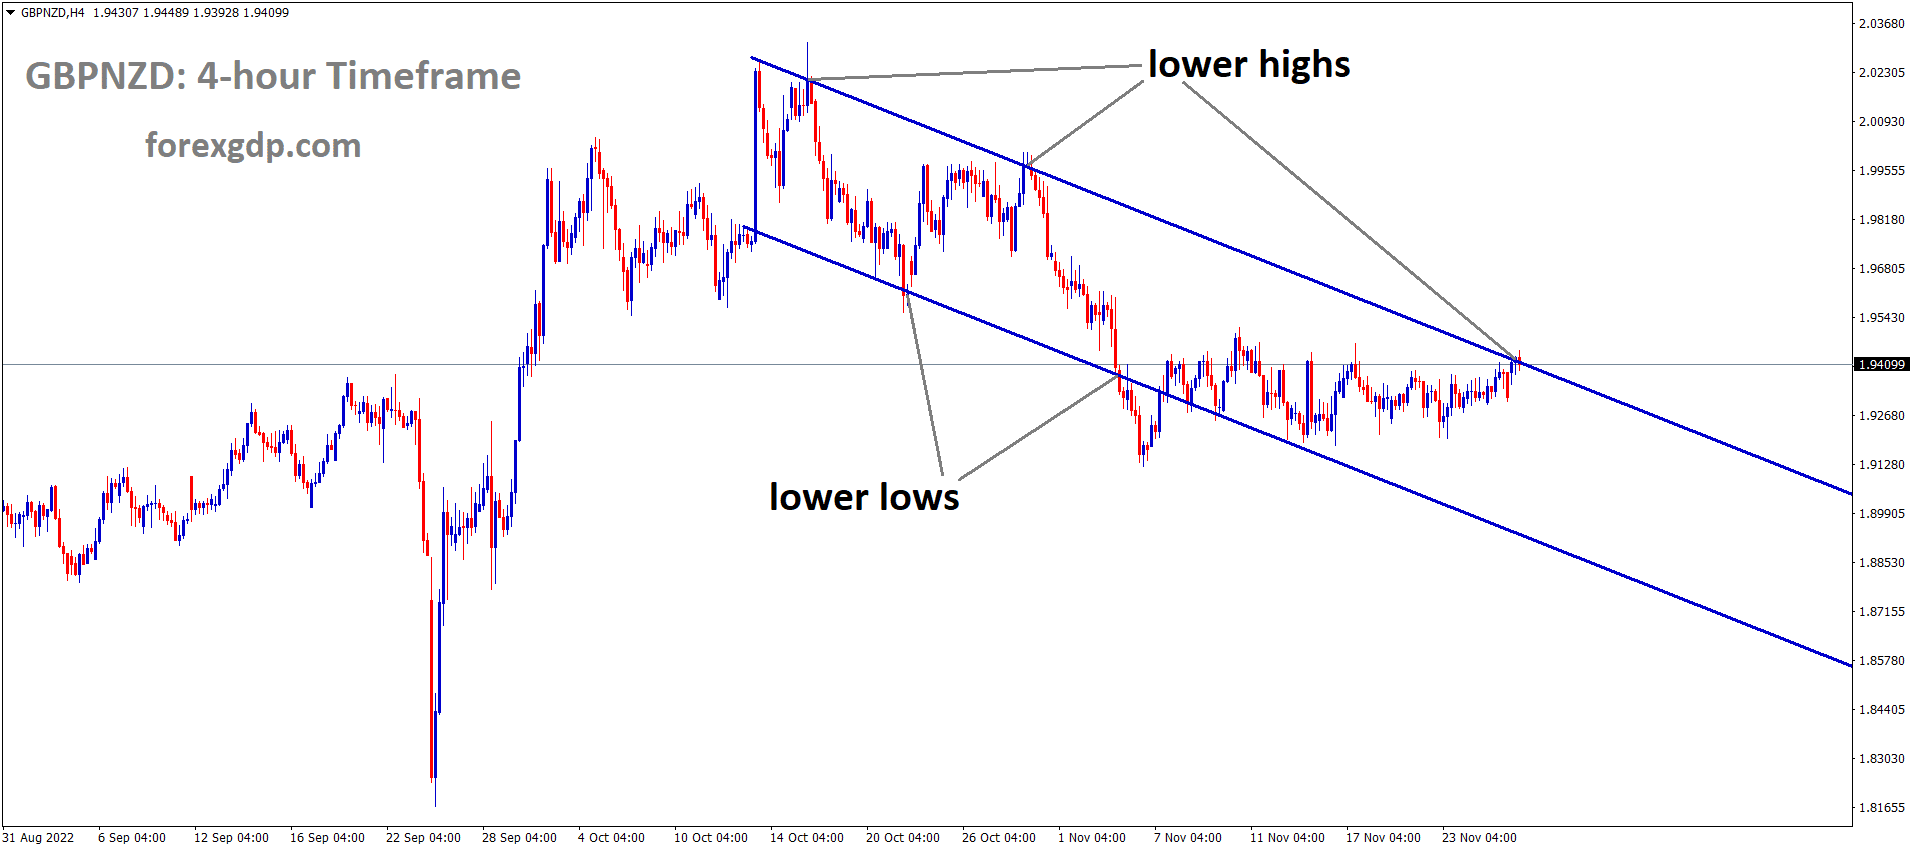 GBPNZD is moving in the Descending channel and the market has reached the lower high area of the channel 1